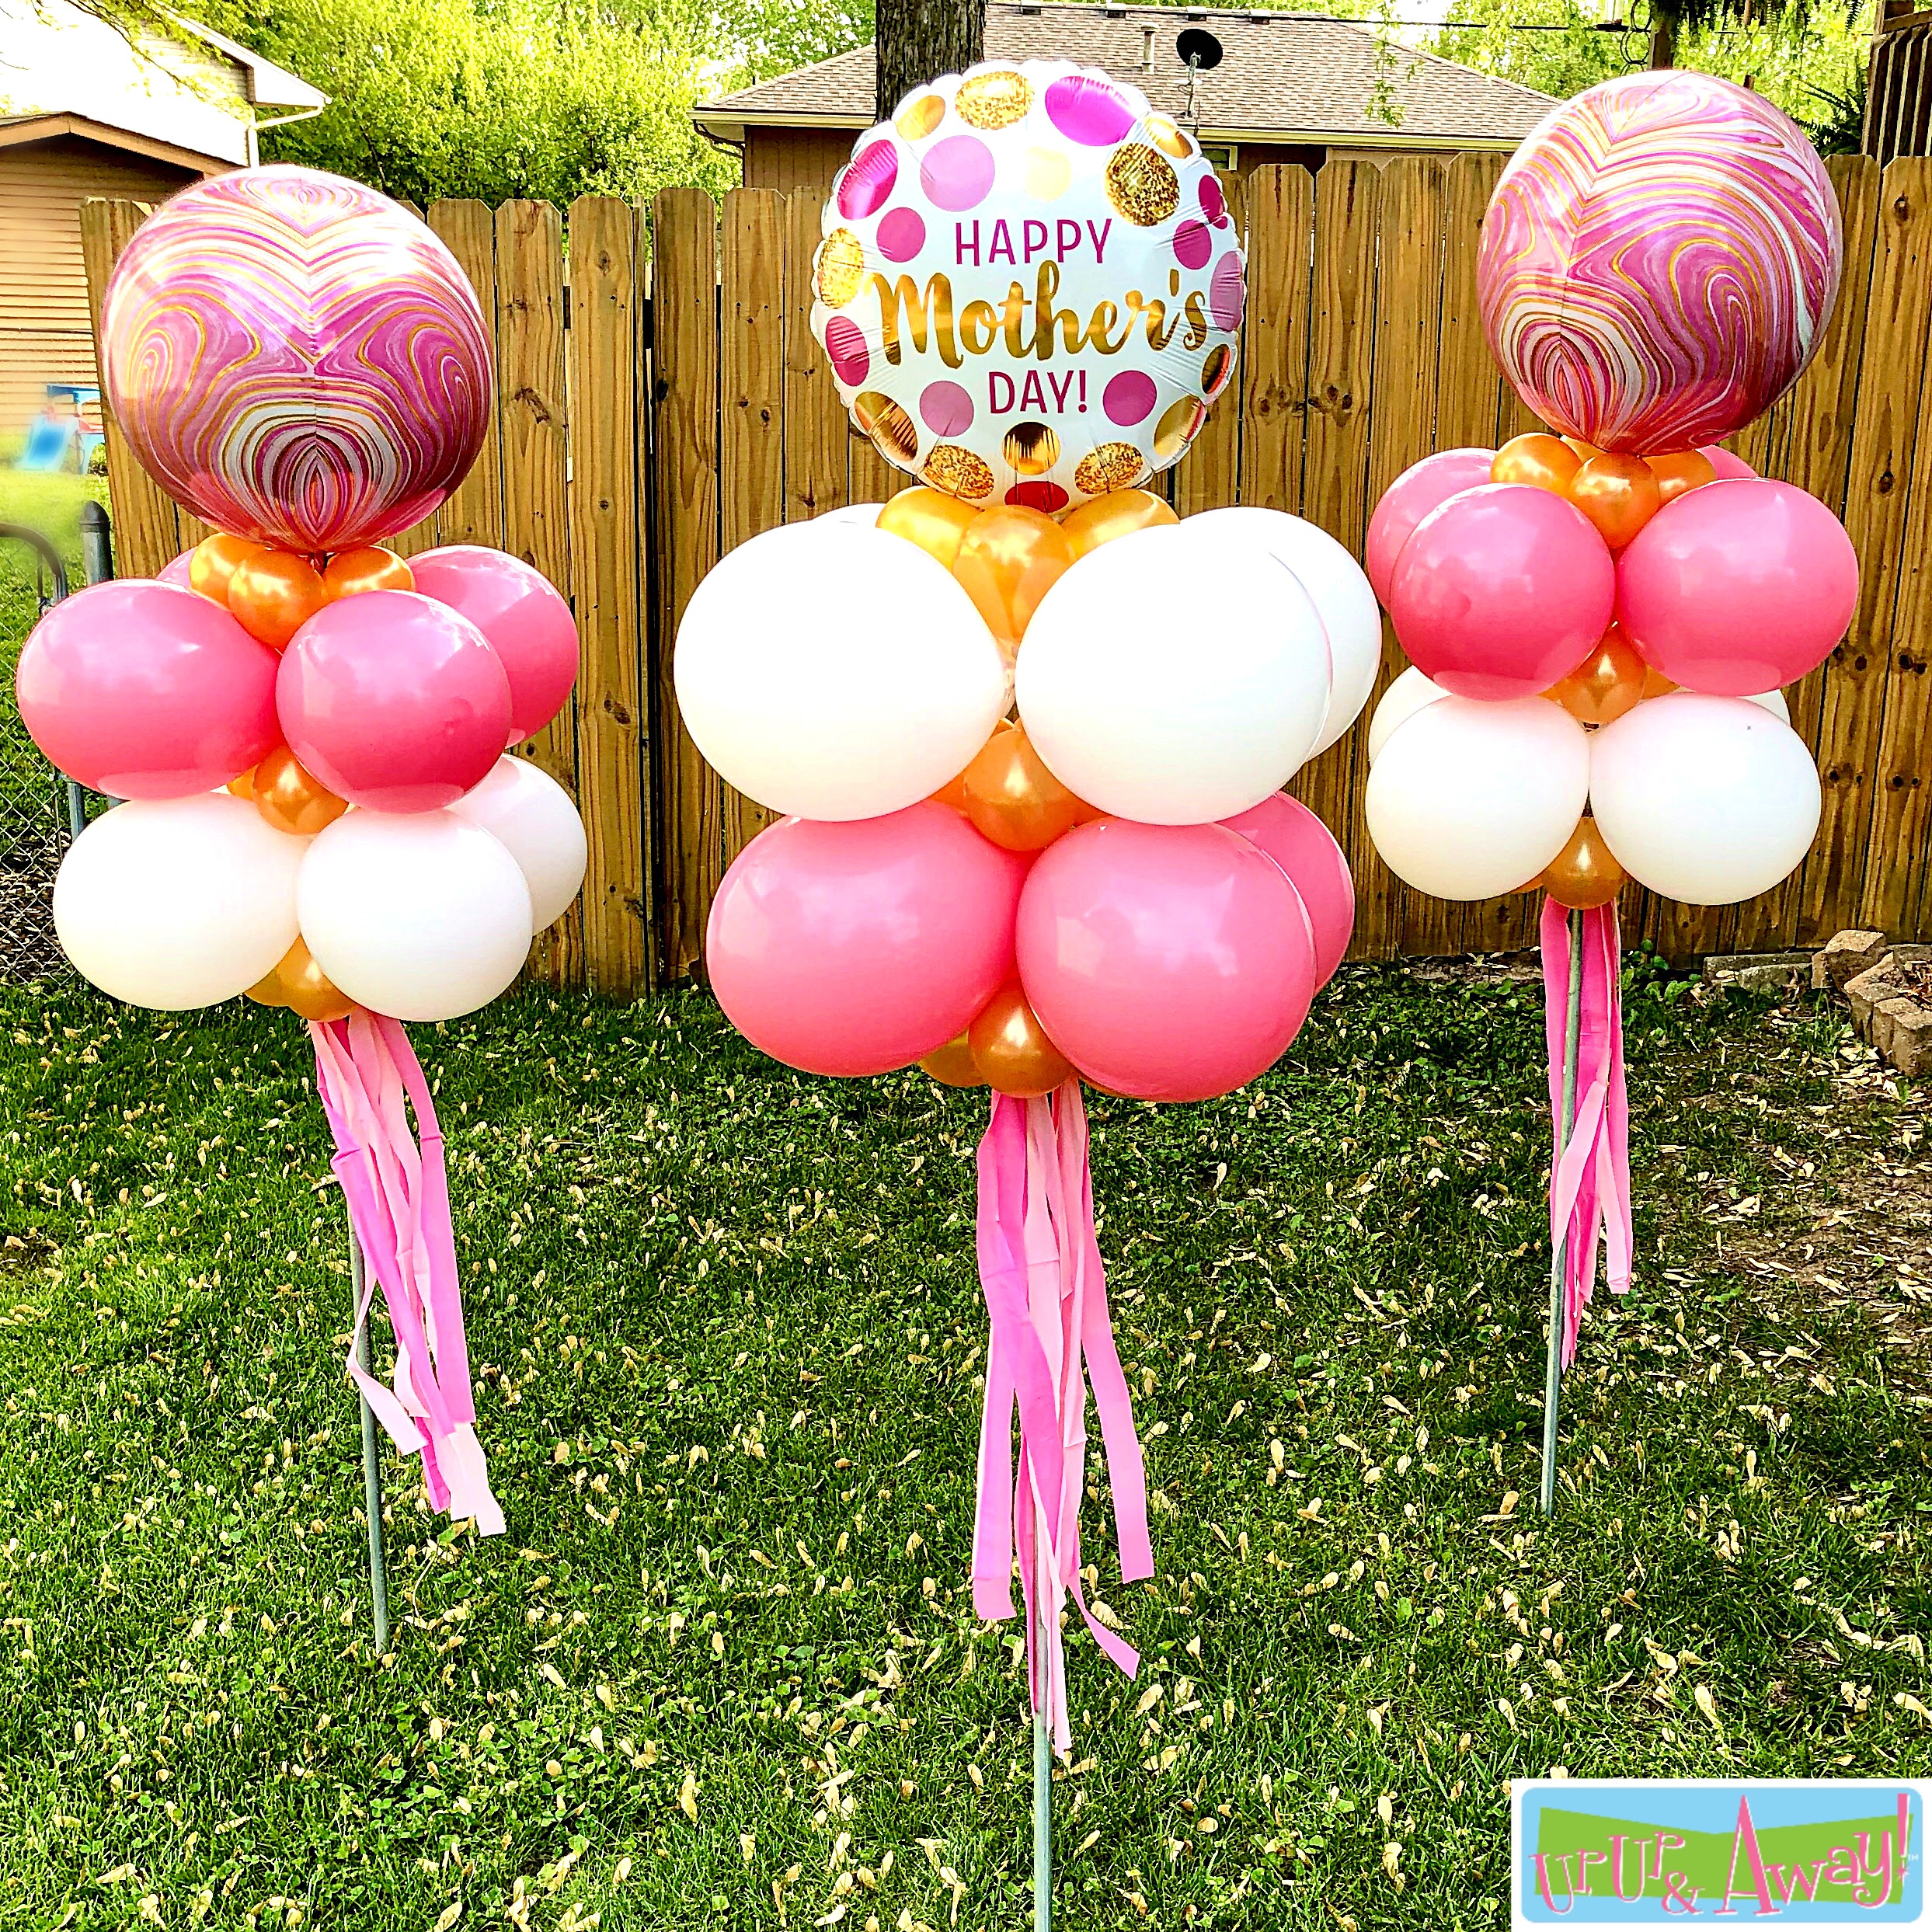 Perfectly Pink Mother's Day | Up, Up & Away! Balloons